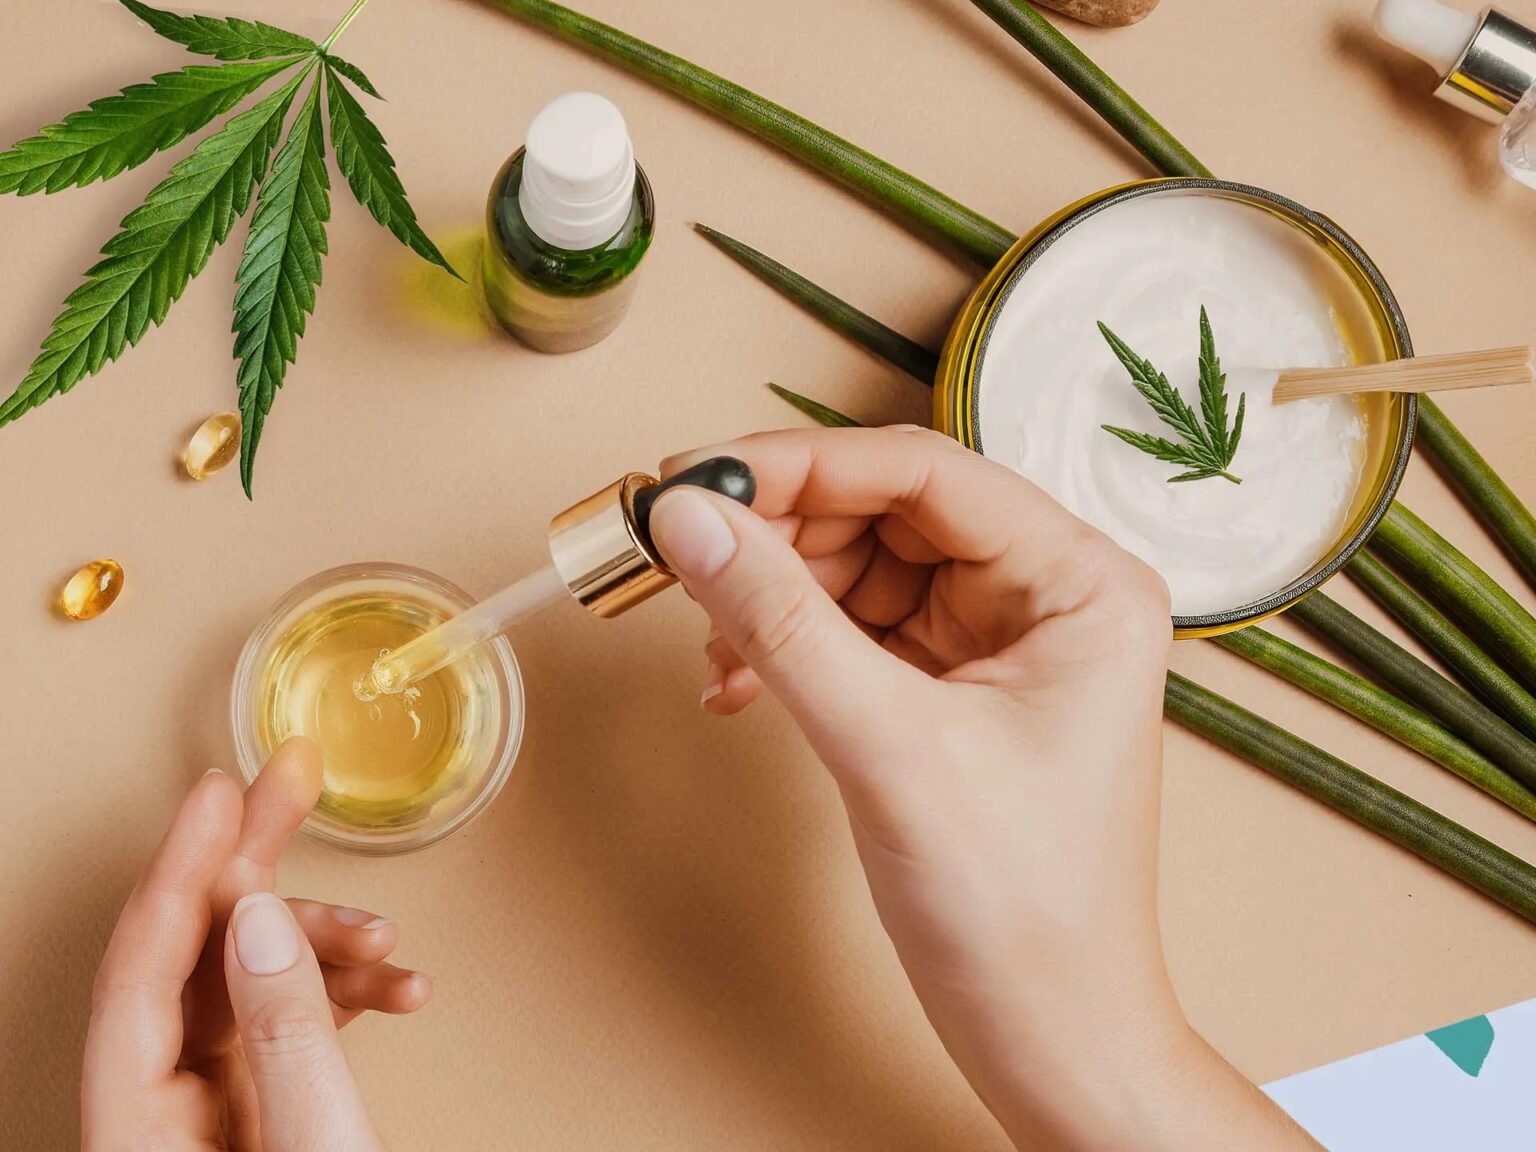 Can cannabis be used to lessen alcohol withdrawal symptoms? Here are all the benefits of CBD you need to know.